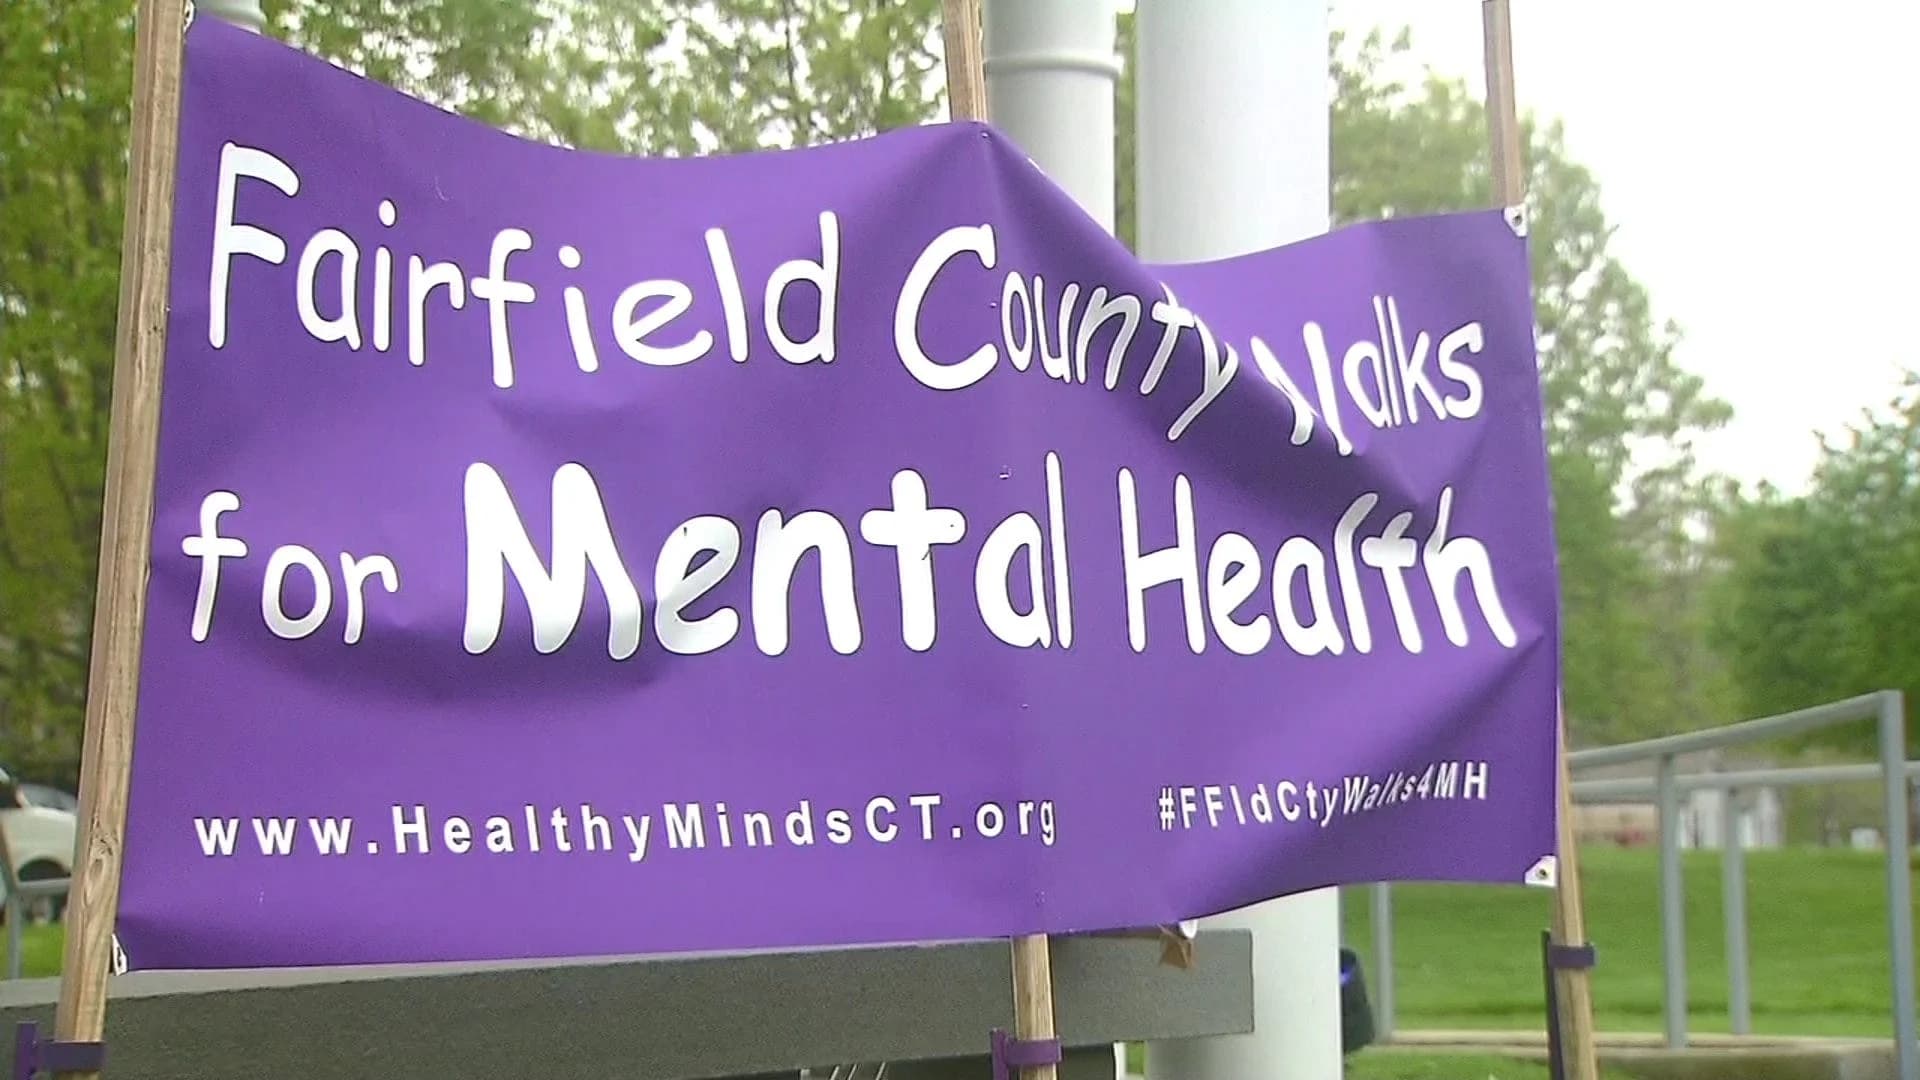 Residents concerned over cuts to mental health services